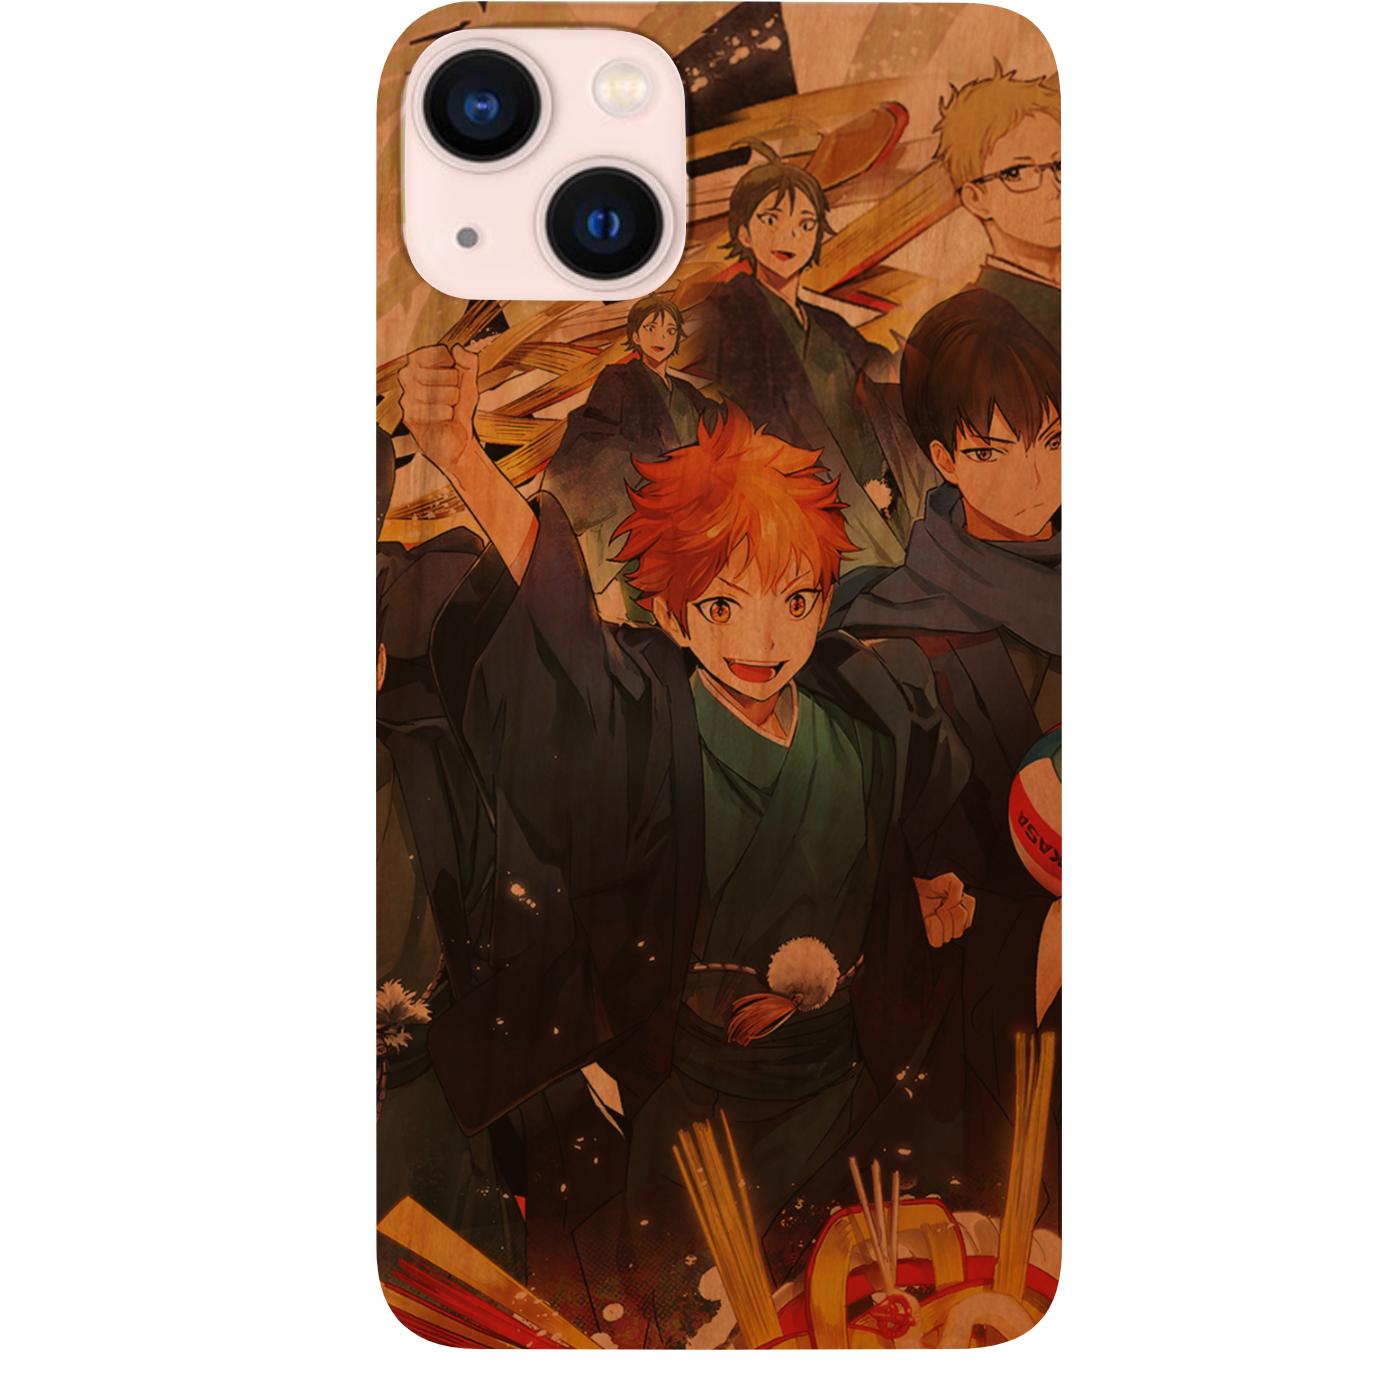 Dragon Sin - Engraved Wood Phone Case - Seven Deadly Sins Anime Case